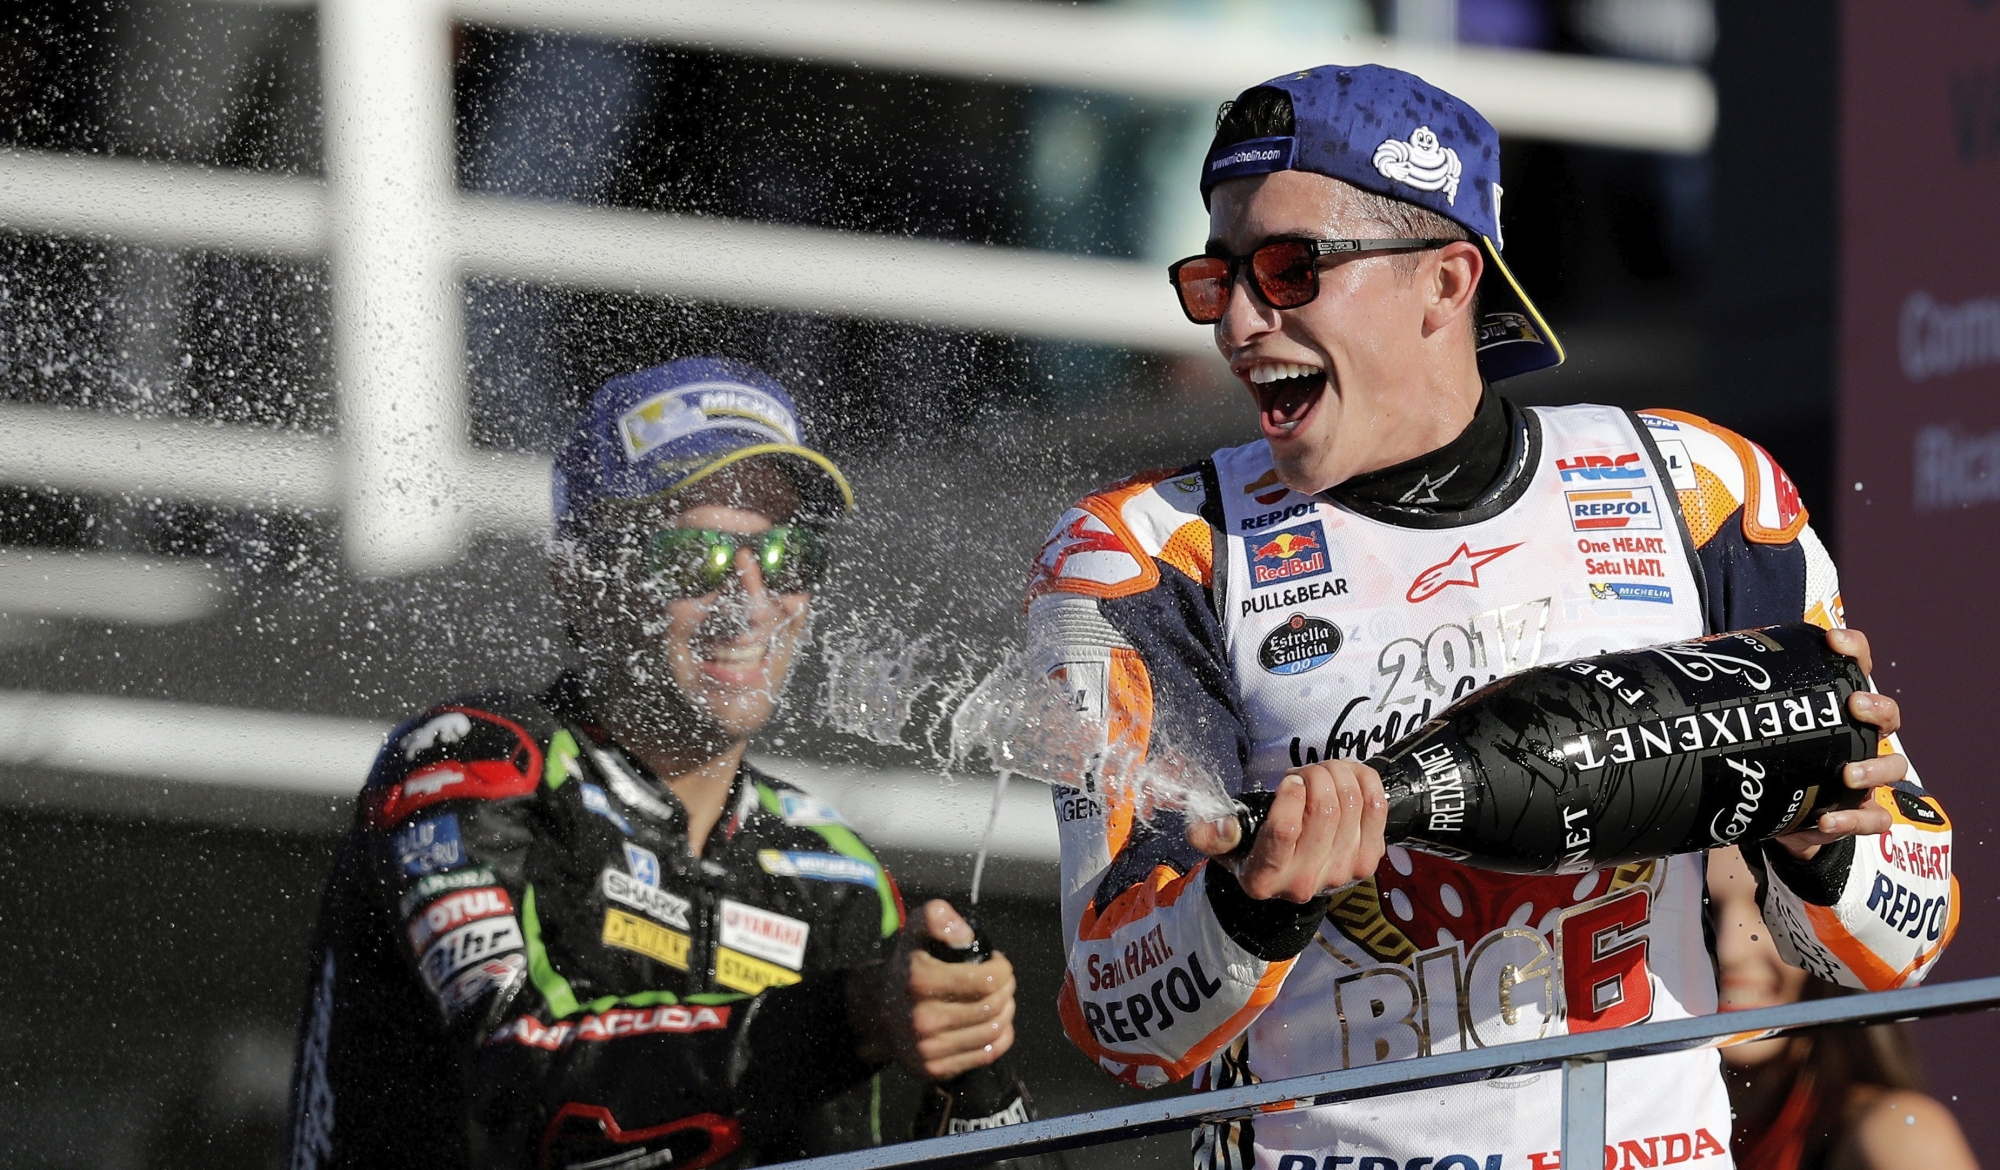 epa06324659 Third placed Spanish MotoGP rider Marc Marquez (R) of Repsol Honda team celebrates on podium after the Comunitat Valenciana motorcycling Grand Prix at Ricardo Tormo track in Cheste, Valencia, eastern Spain, 12 November 2017. Marquez clinched his fourth MotoGP world title.  EPA/Manuel Bruque SPAIN MOTORCYCLING GRAND PRIX